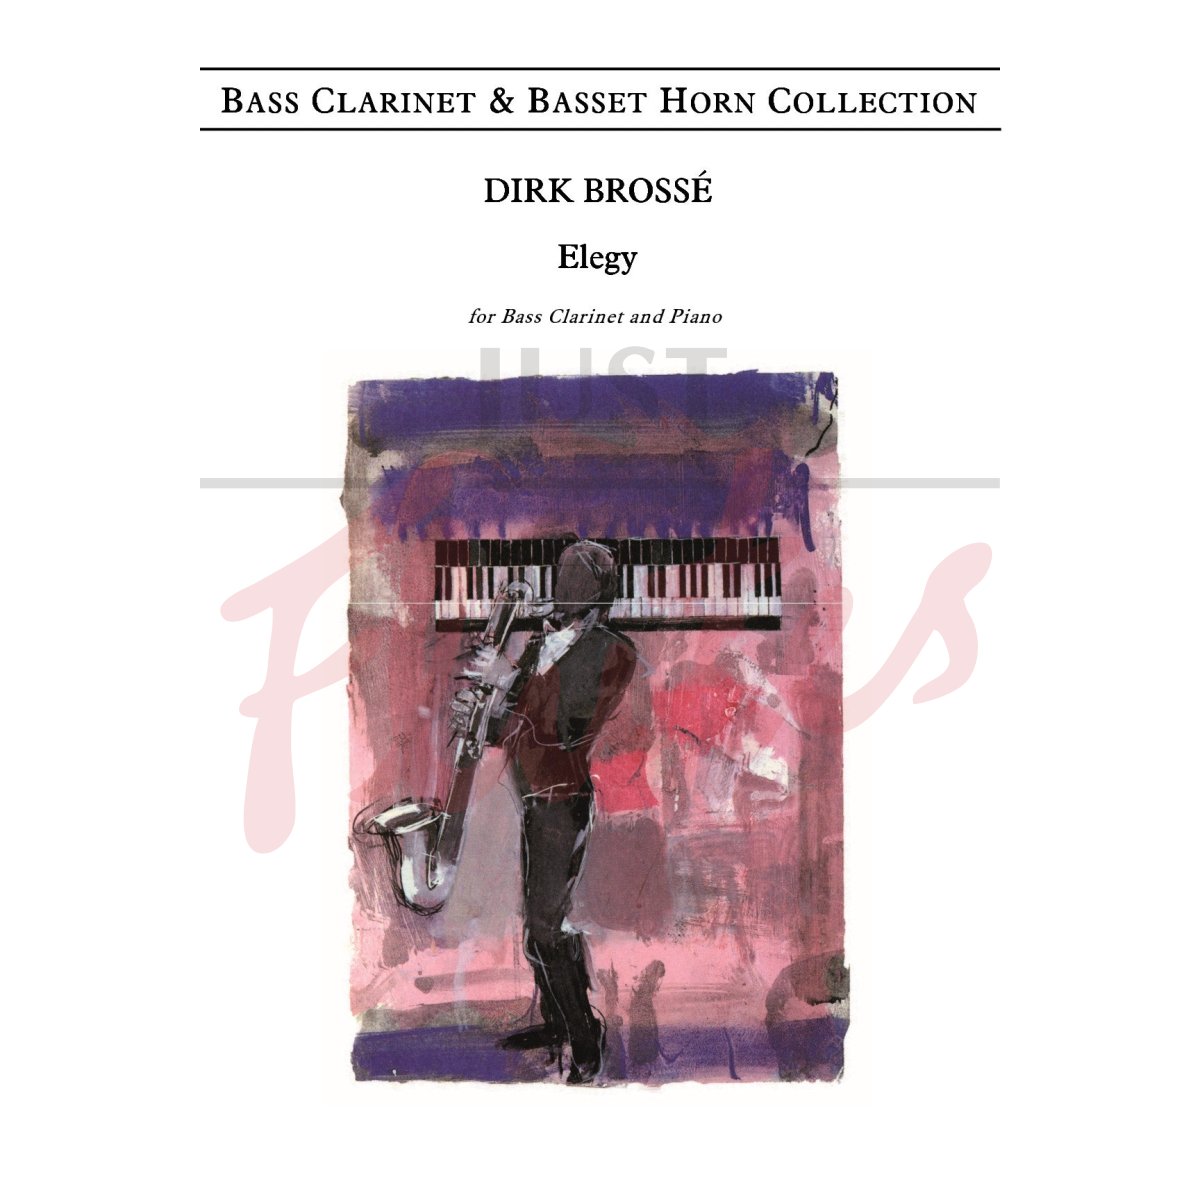 Elegy for Bass Clarinet and Piano